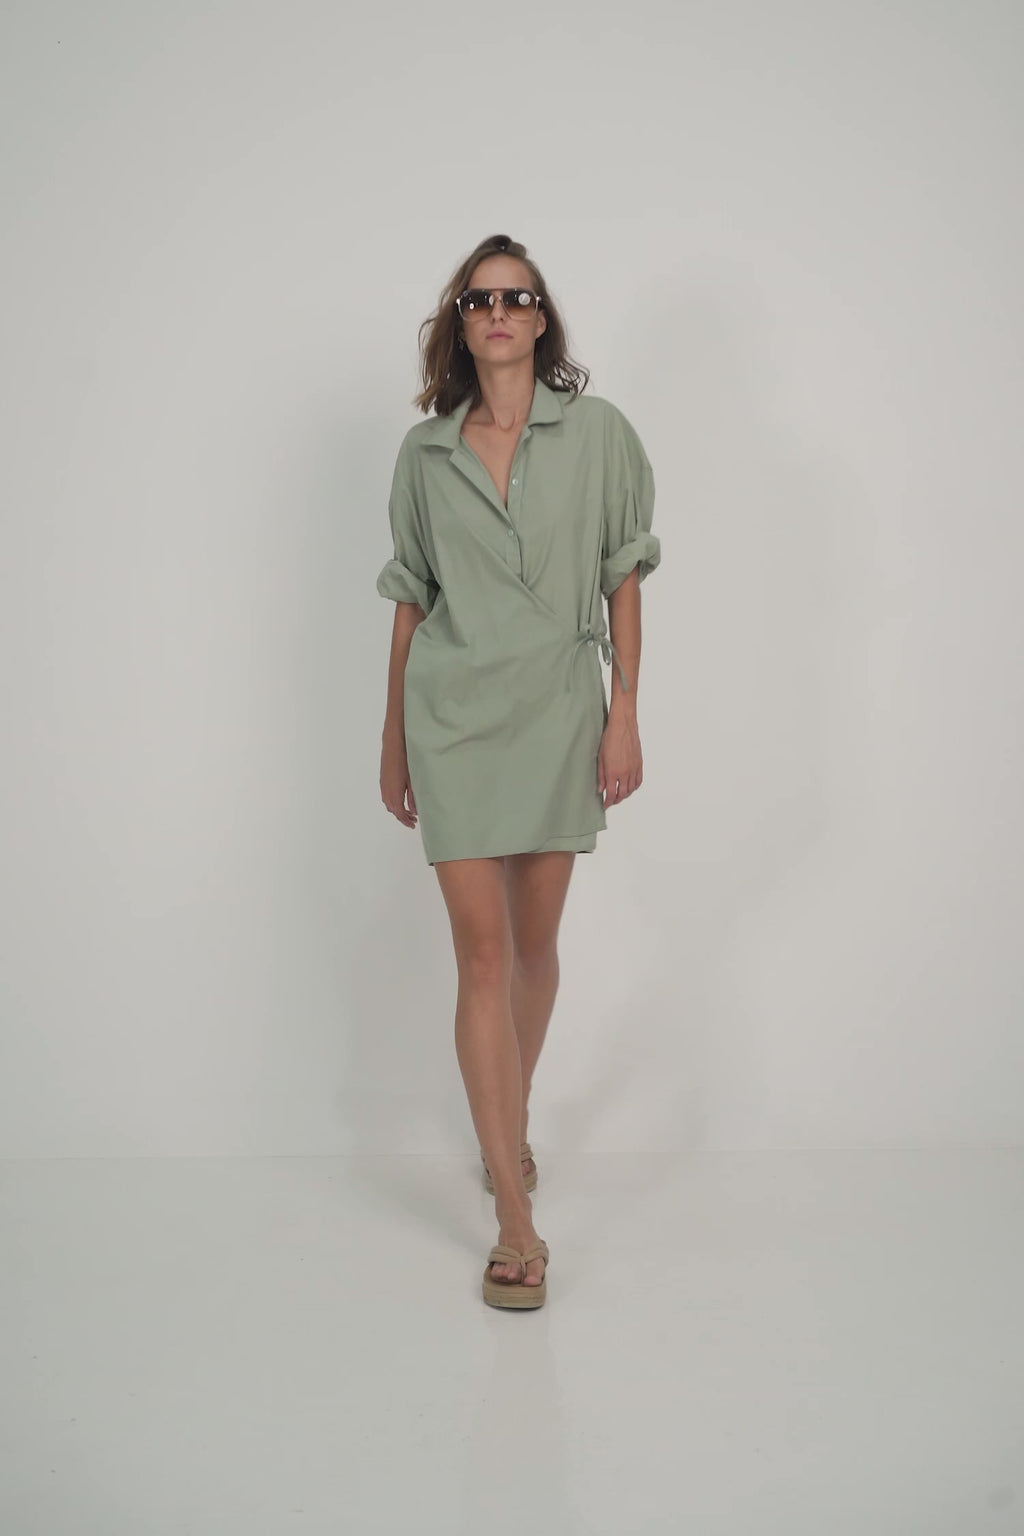 A Model Wears a Casual Green Cotton Mini Dress for Summer